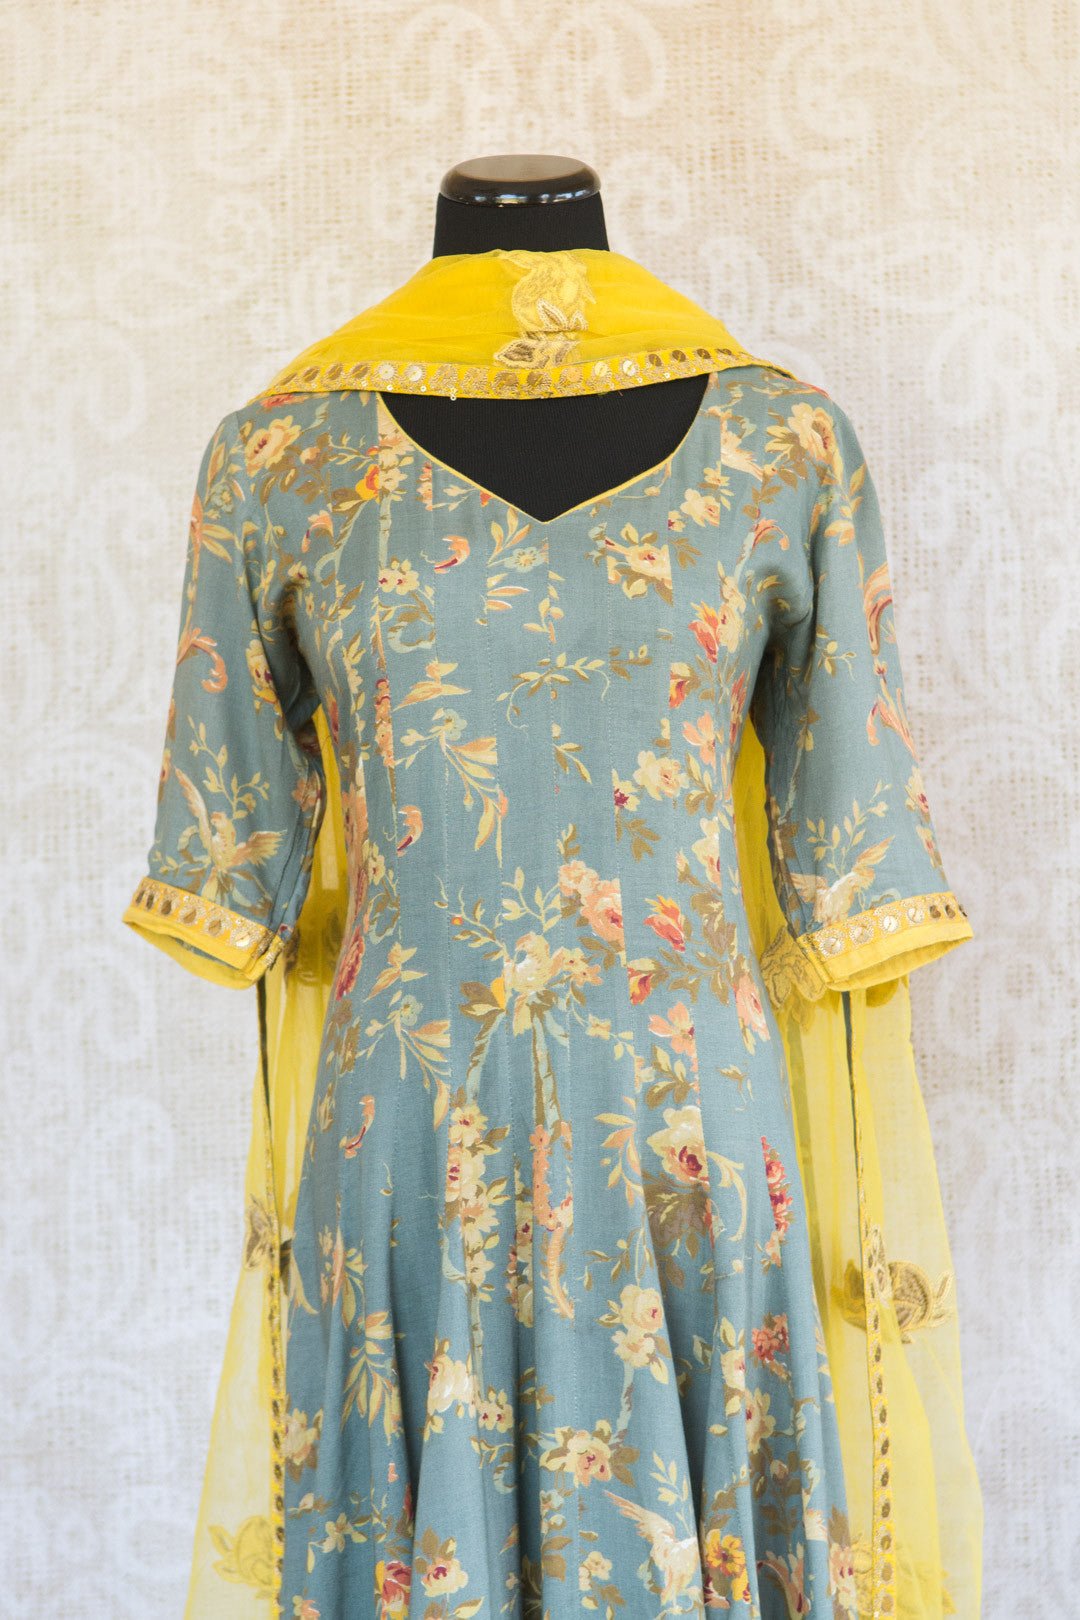 501067-suit-3/4-lenght-sleeve-light-blue-floral-print-gold-yellow-accent-alternate-view